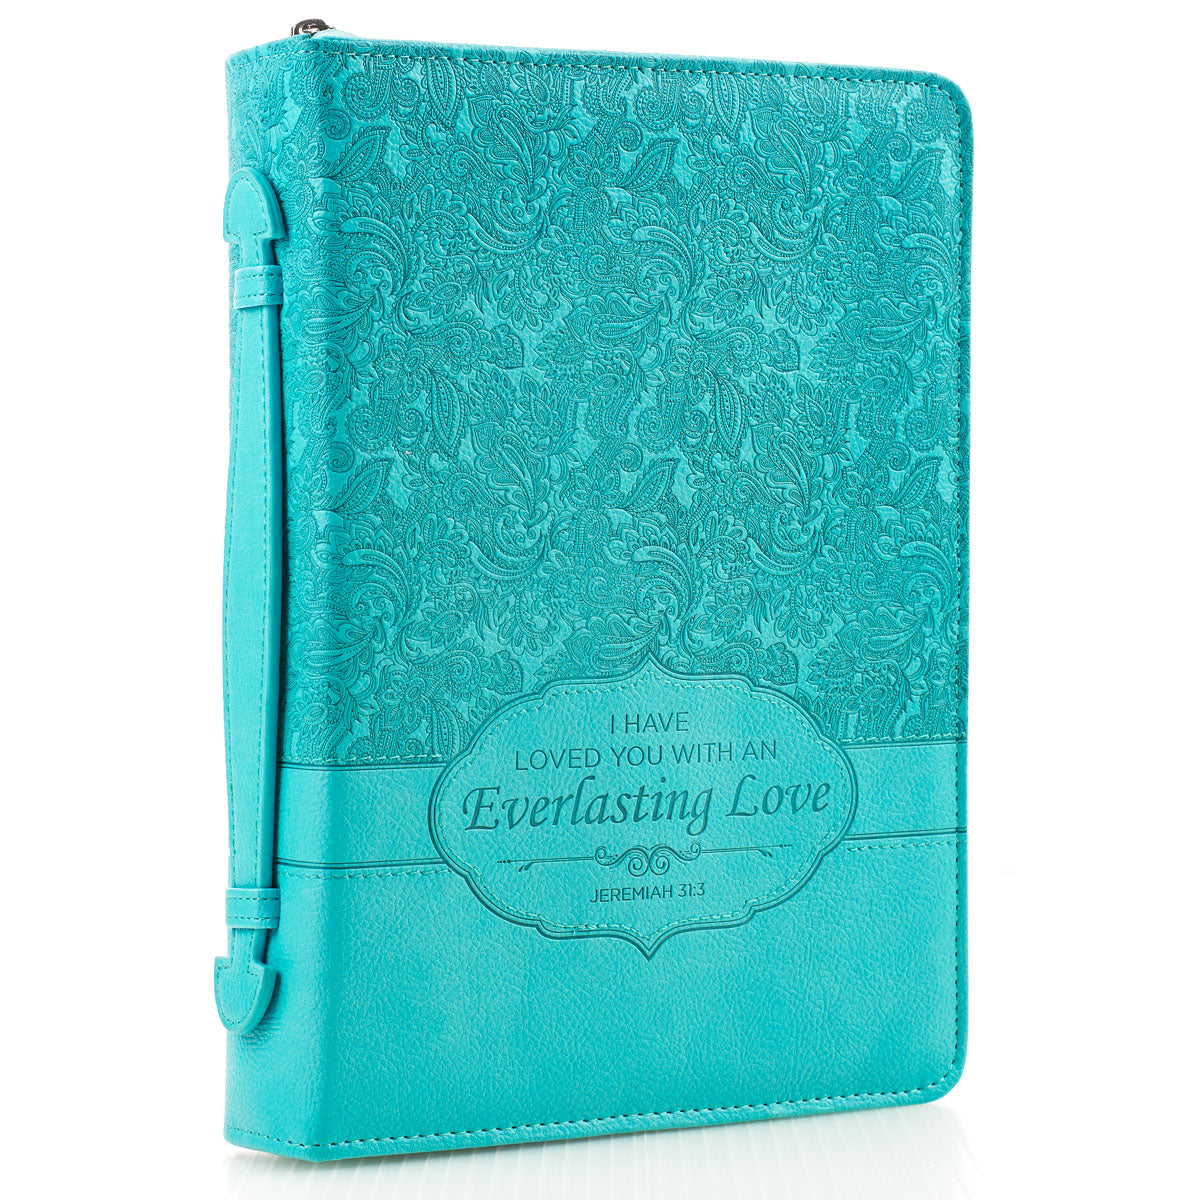 Everlasting Love Turquoise Faux Leather Fashion Bible Cover - Jeremiah 31:3 - The Christian Gift Company